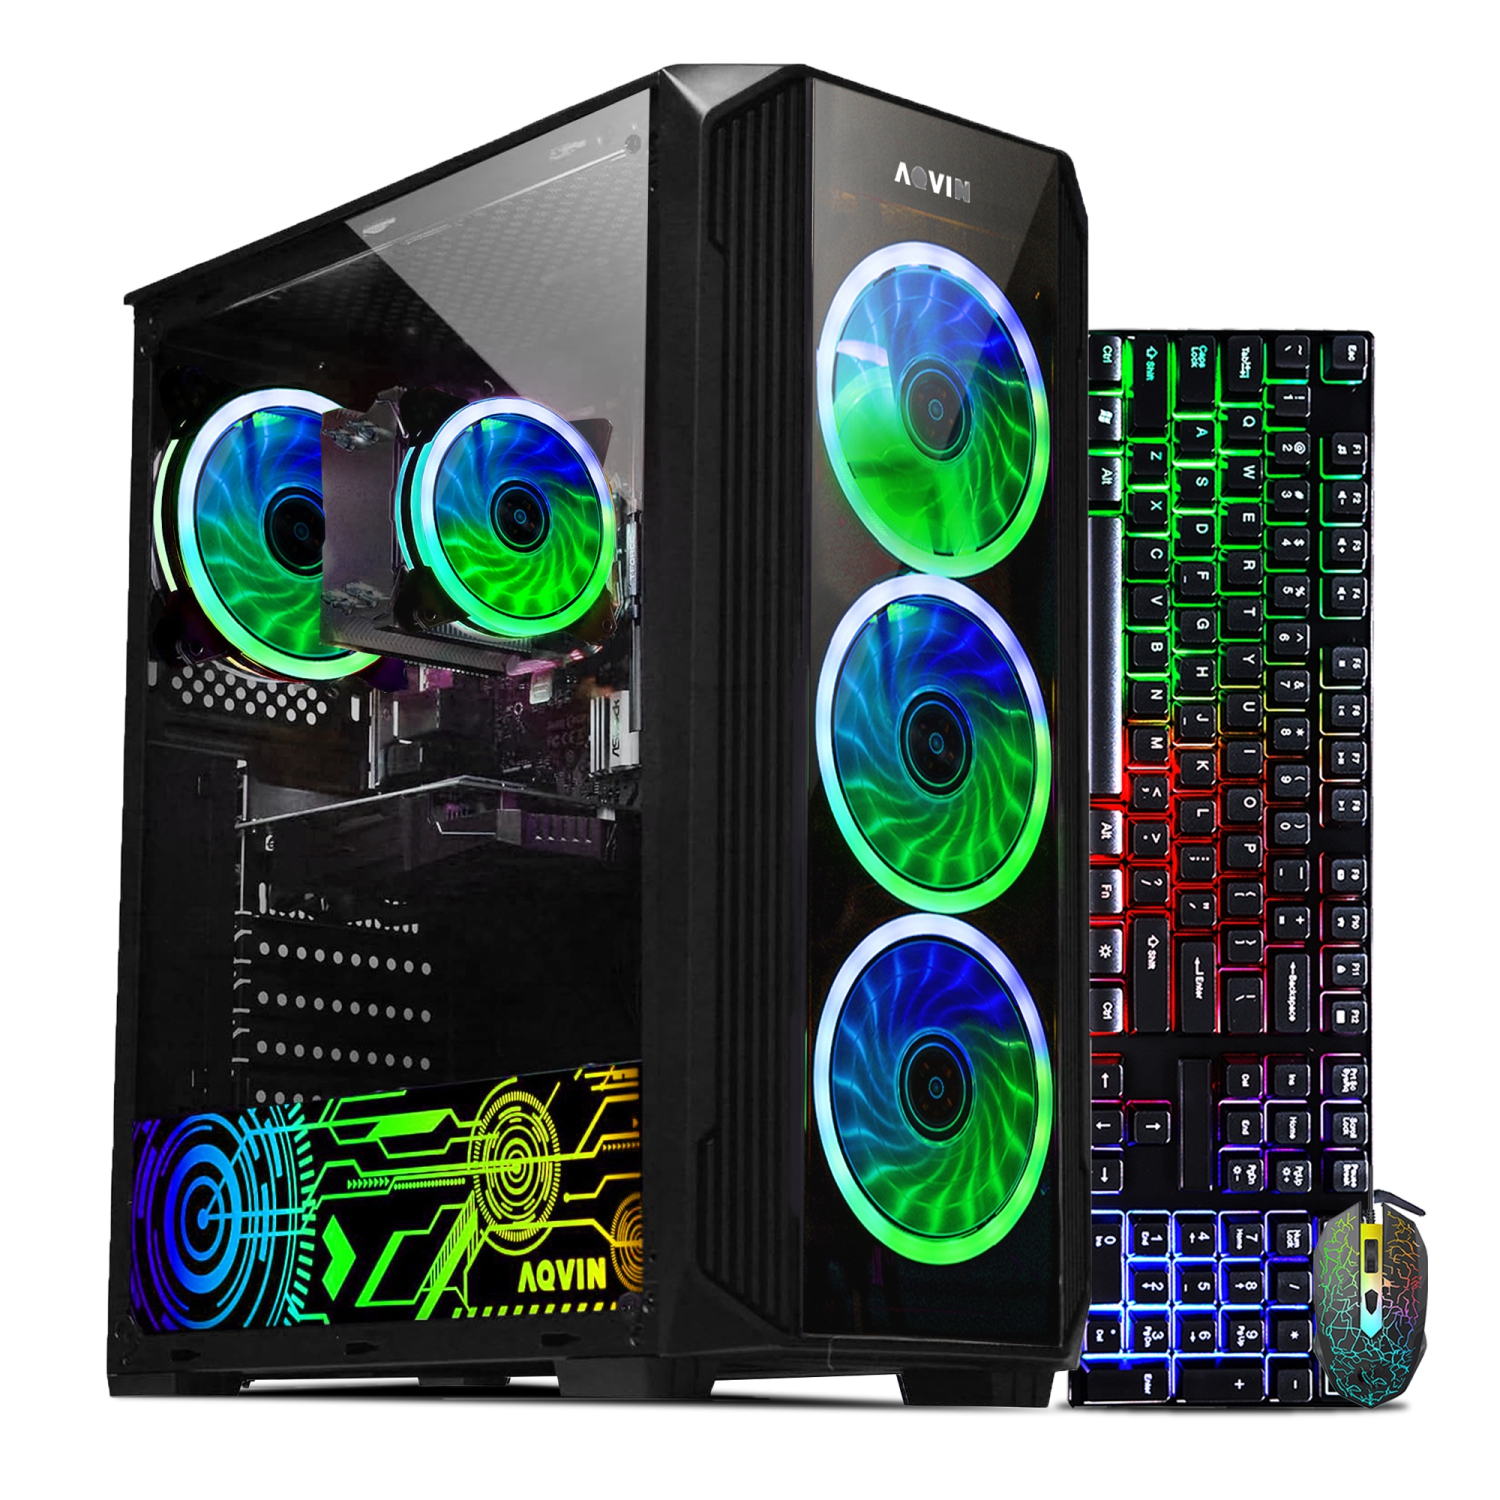 Refurbished (Excellent) Gaming PC AQVIN Desktop Computer Tower - Black, Intel Core i7 up to 4.0 GHz 1TB SSD 32GB DDR4 RAM, Radeon RX 580 8GB, Windows 10 Pro - Only at Best Buy